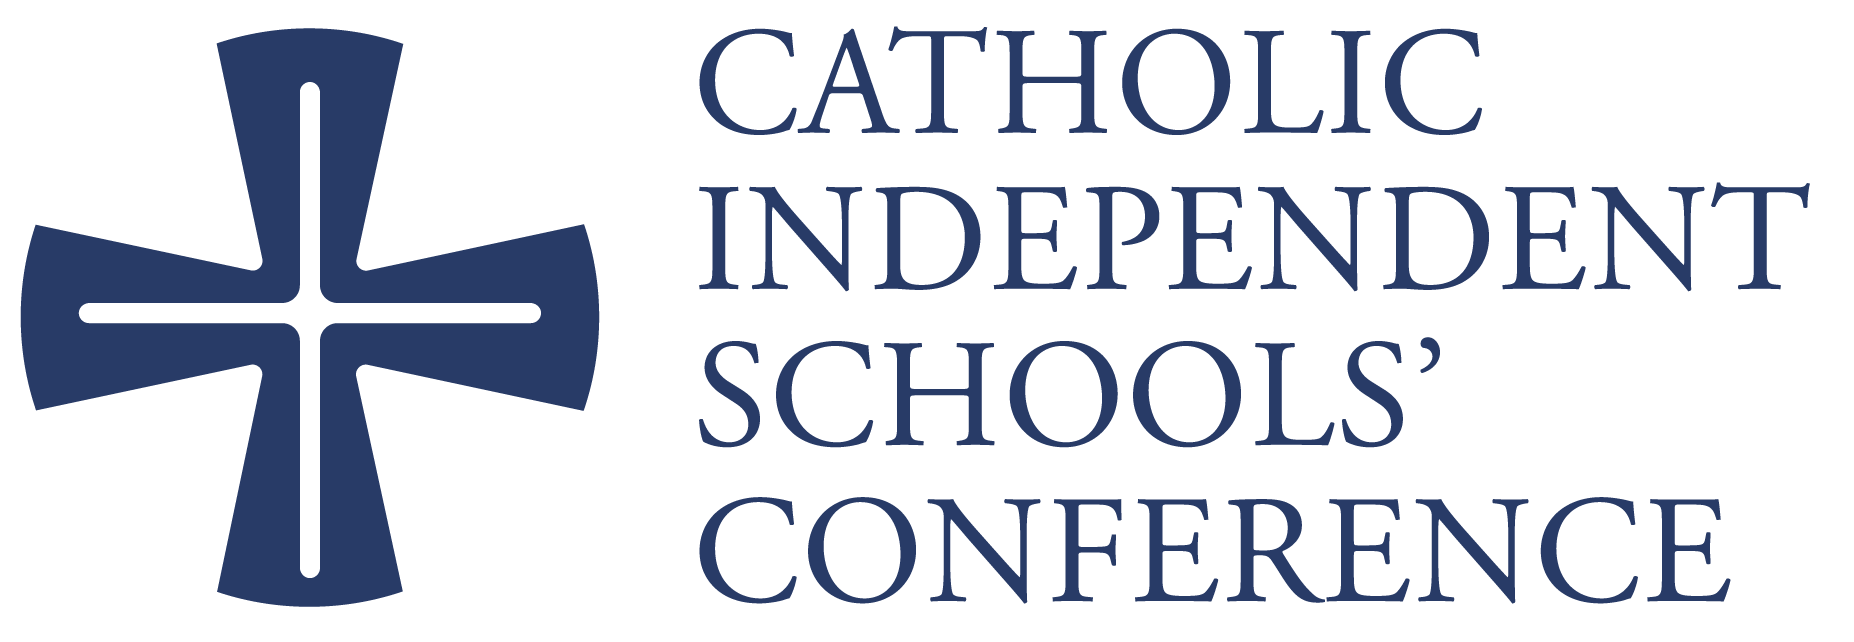 Catholic Independent Schools' Conference